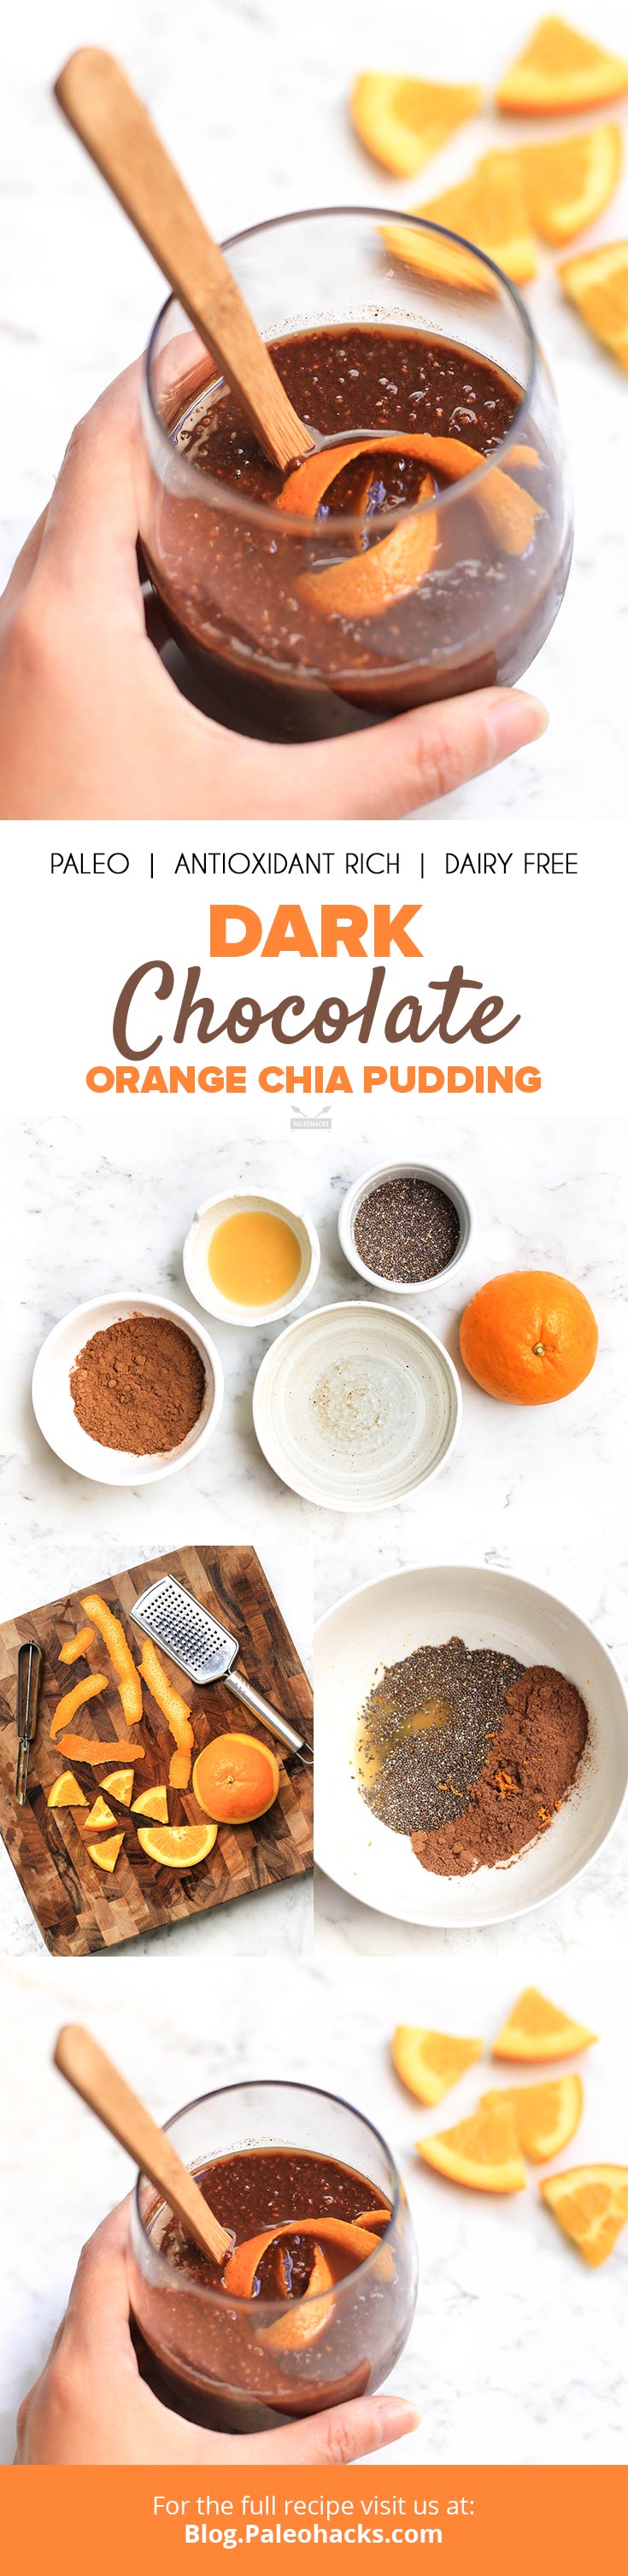 This dark chocolate chia pudding is perfect for anyone who isn't a morning person. The hint of citrus orange goes beautifully with the rich chocolate taste.